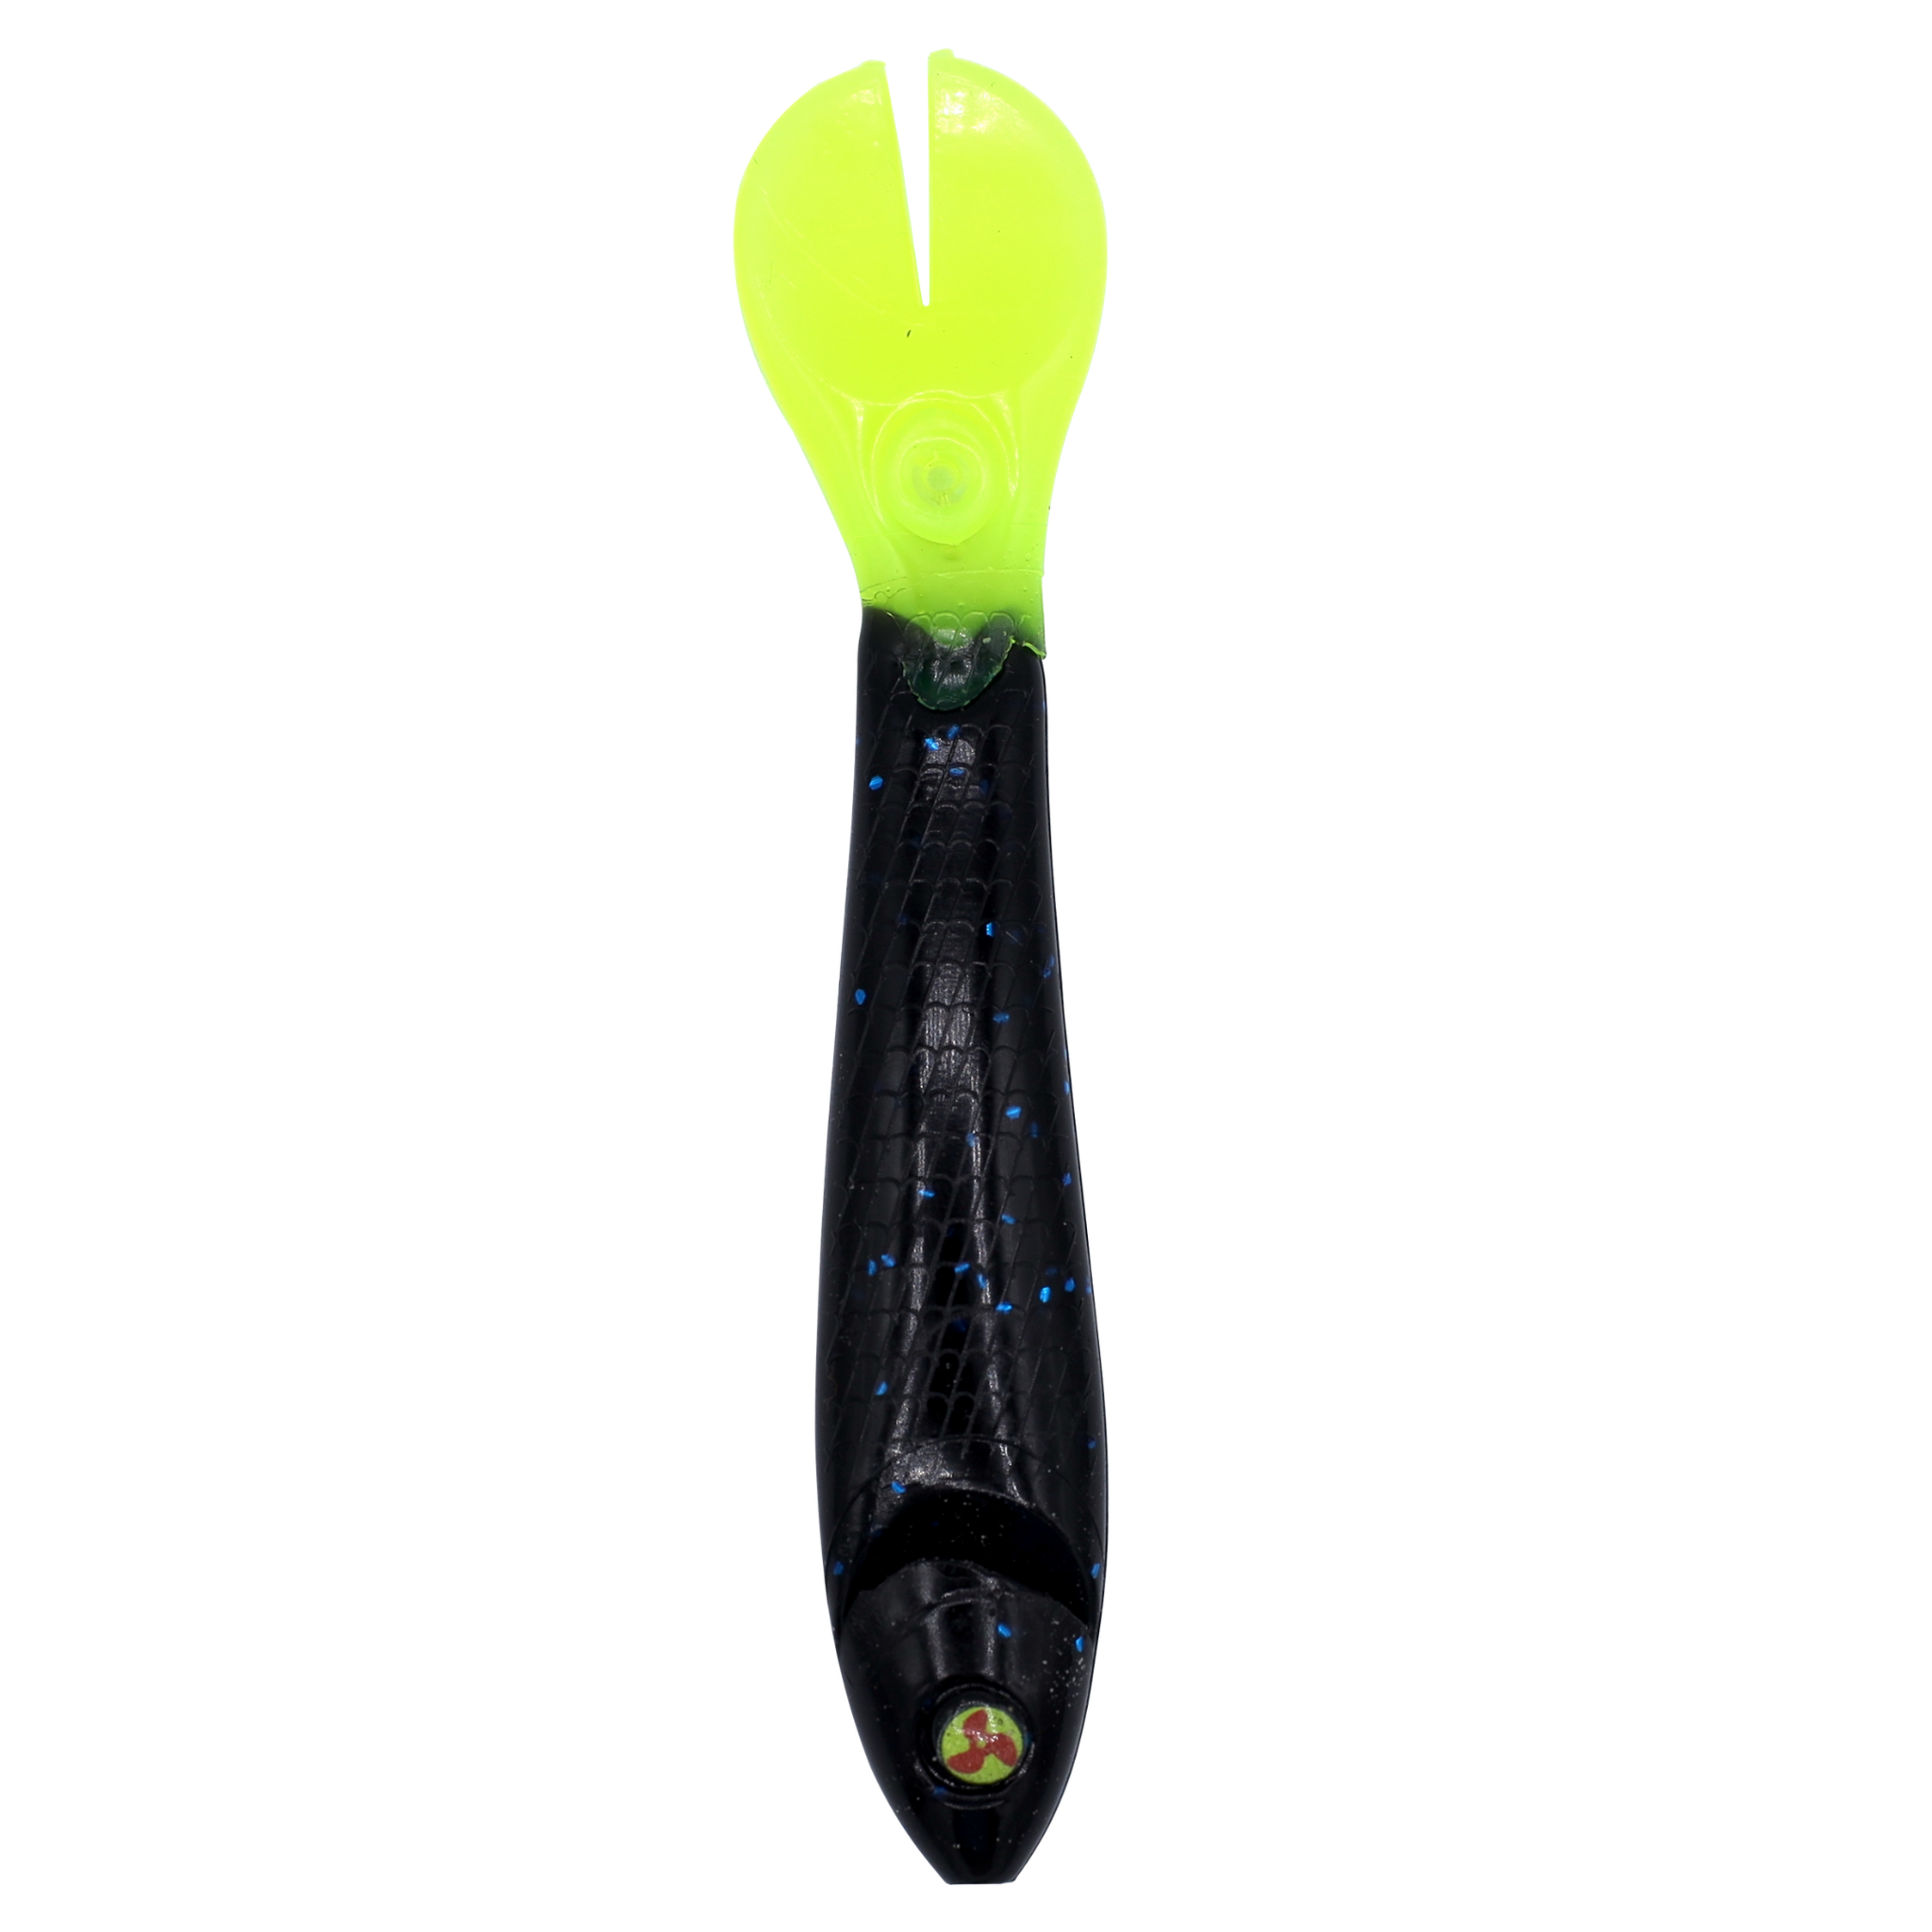 https://cdn.prod.marmalade.co/products/3840x3840/filters:quality(80)/www.lawlesslures.com%2Fproducts%2Frecoil-bait-5pack-325in-black-blue-flake-chartreuse-tail%2F1695924217%2FBlackBlueFlakew_ChartreuseFlat_6447afc2-7349-496f-a5dd-46e299ea7699.png